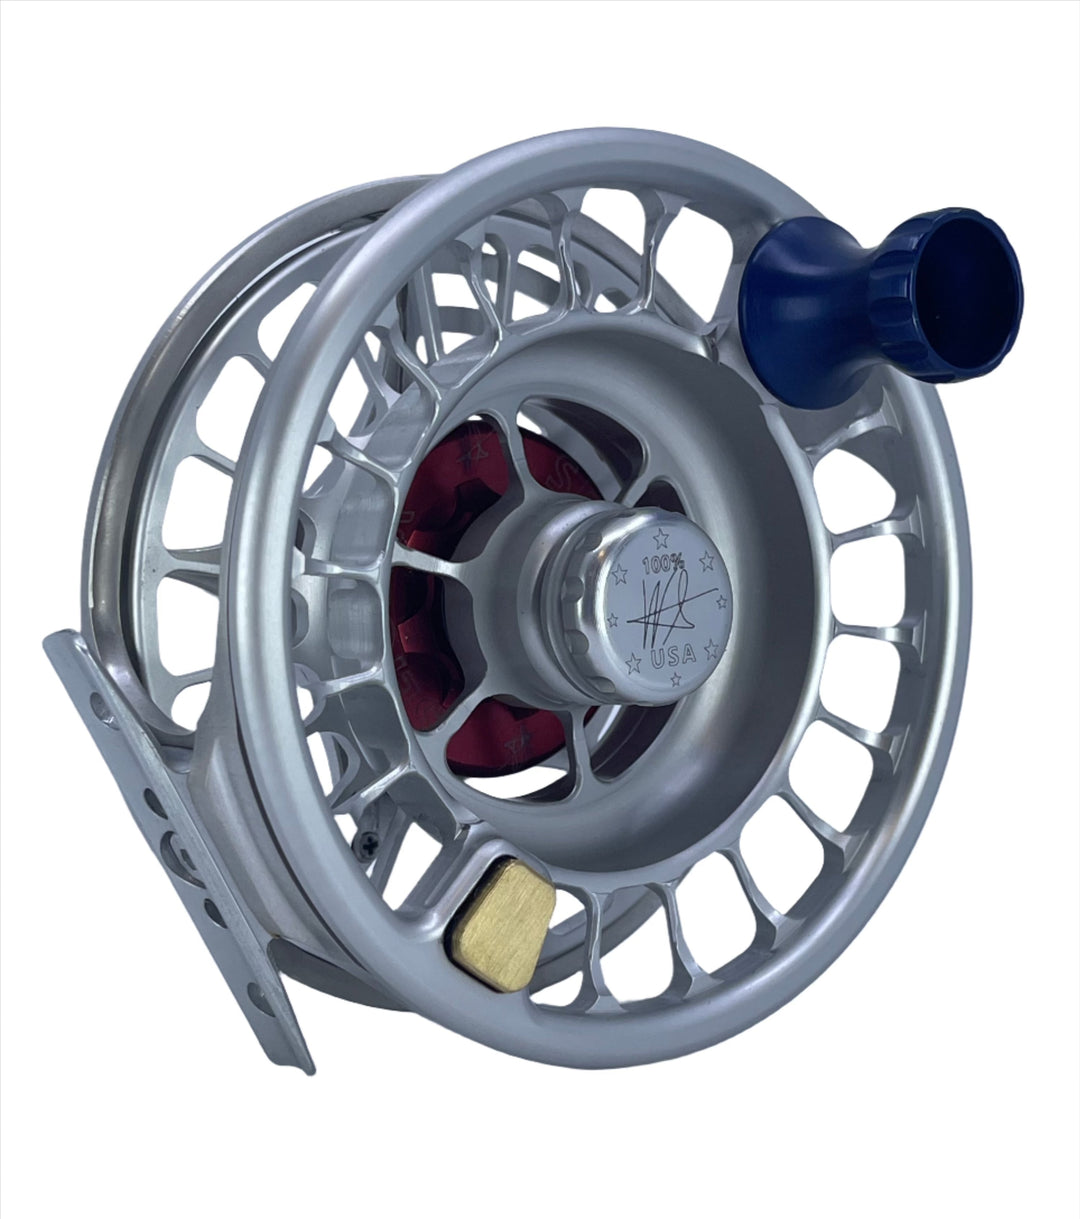 Seigler BF (11-13wt) - Silver w/ Matching Spool, Blue Drag Knob, Blue Handle, Red Lever, Red Thrust Plate (Custom -IN STOCK)